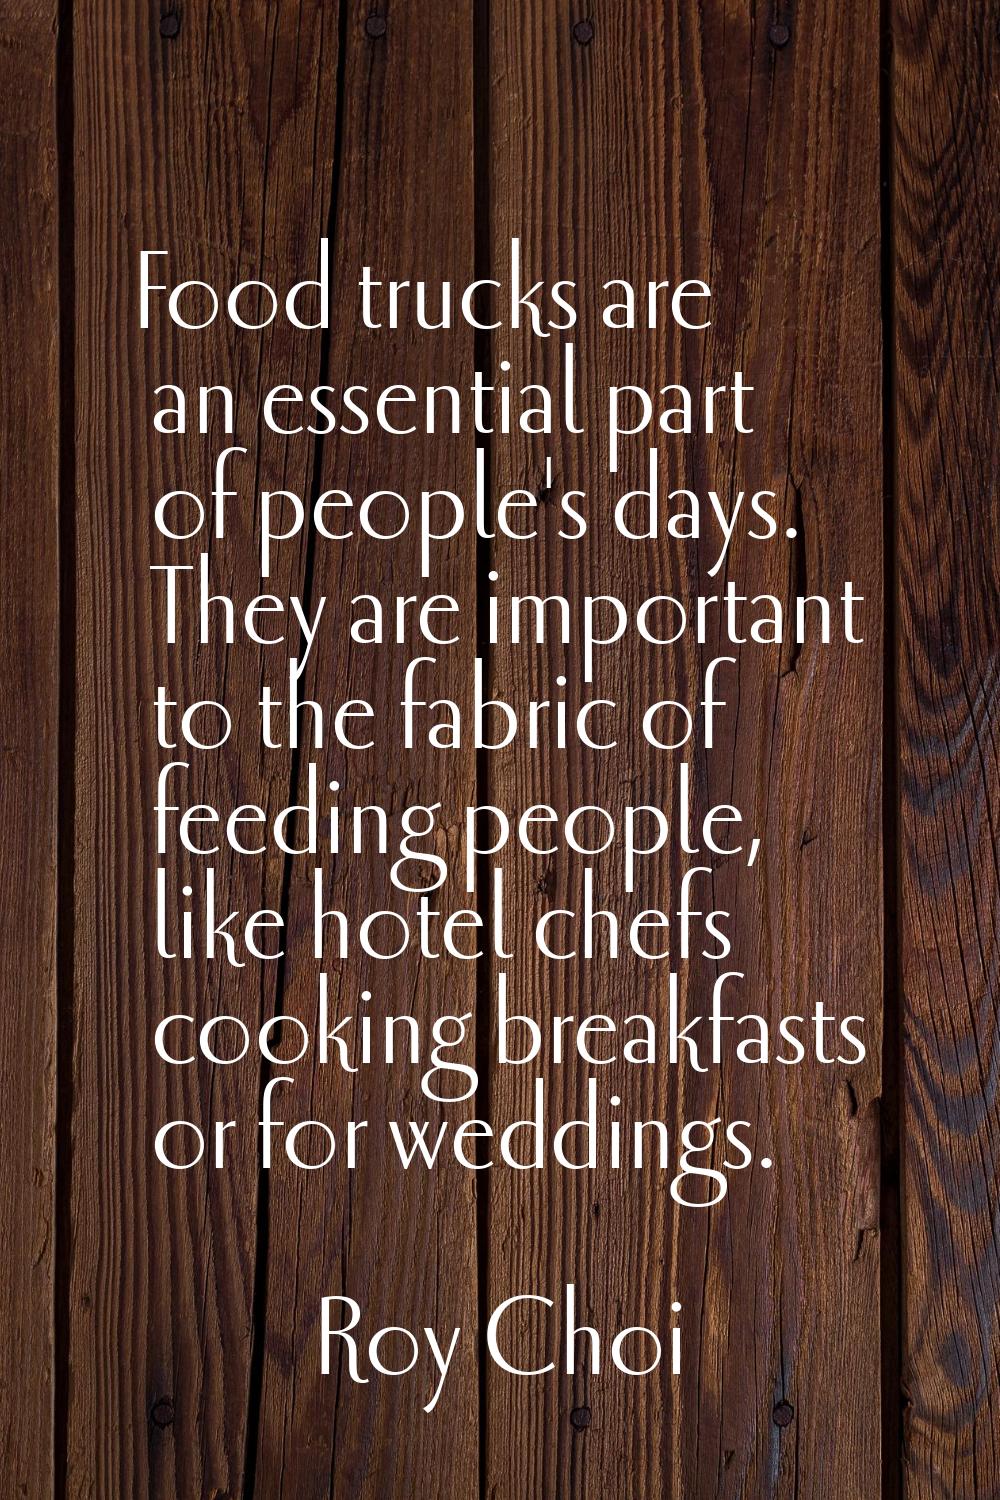 Food trucks are an essential part of people's days. They are important to the fabric of feeding peo